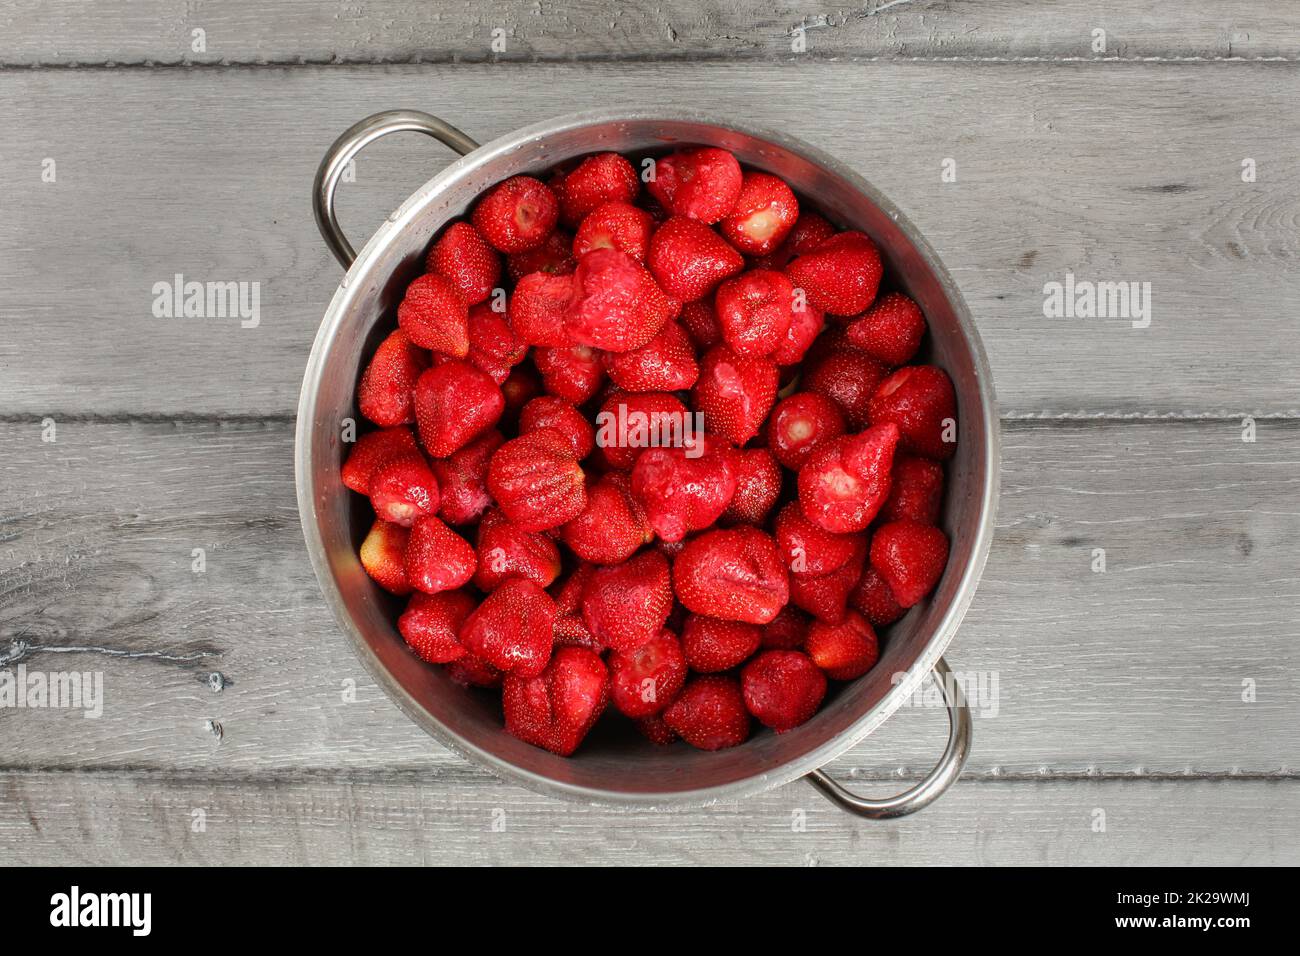 Tabletop view, steel pot full of strawberries with leaves removed. Homemade strawberry jam preparation. Stock Photo